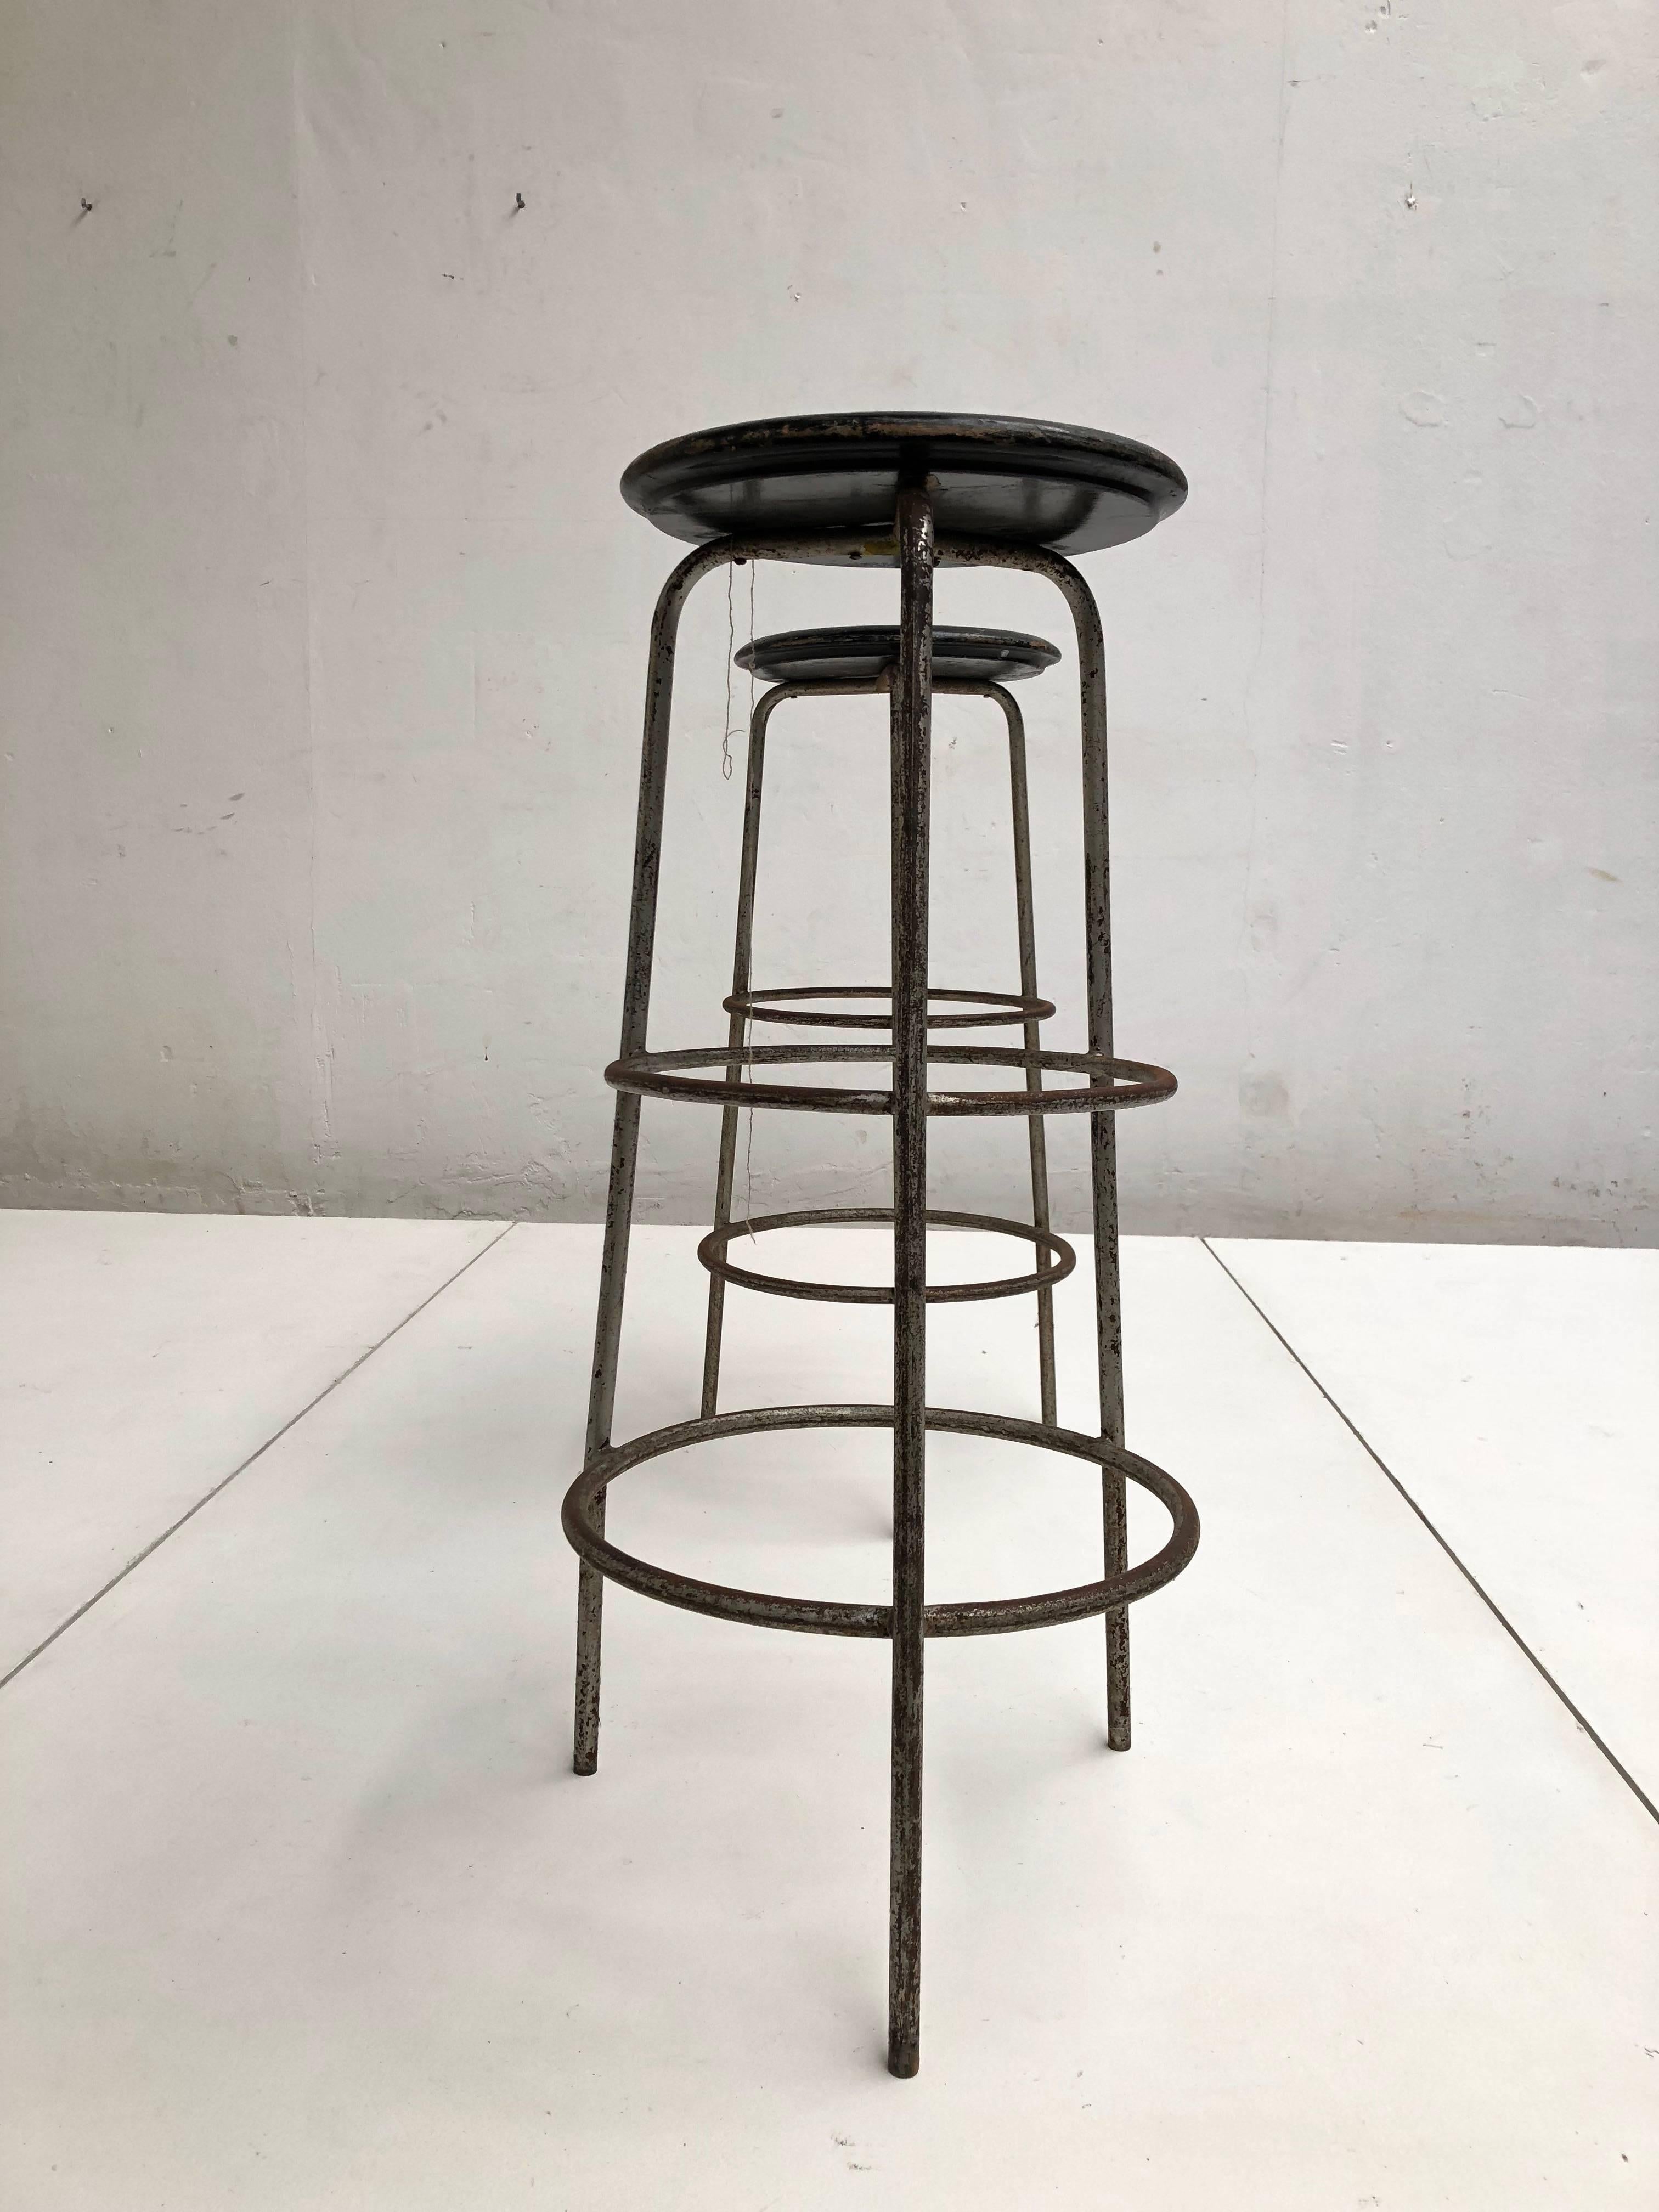 Steel Pair of 1950s Swiss Industrial Confection Atelier Working or Bar Stools